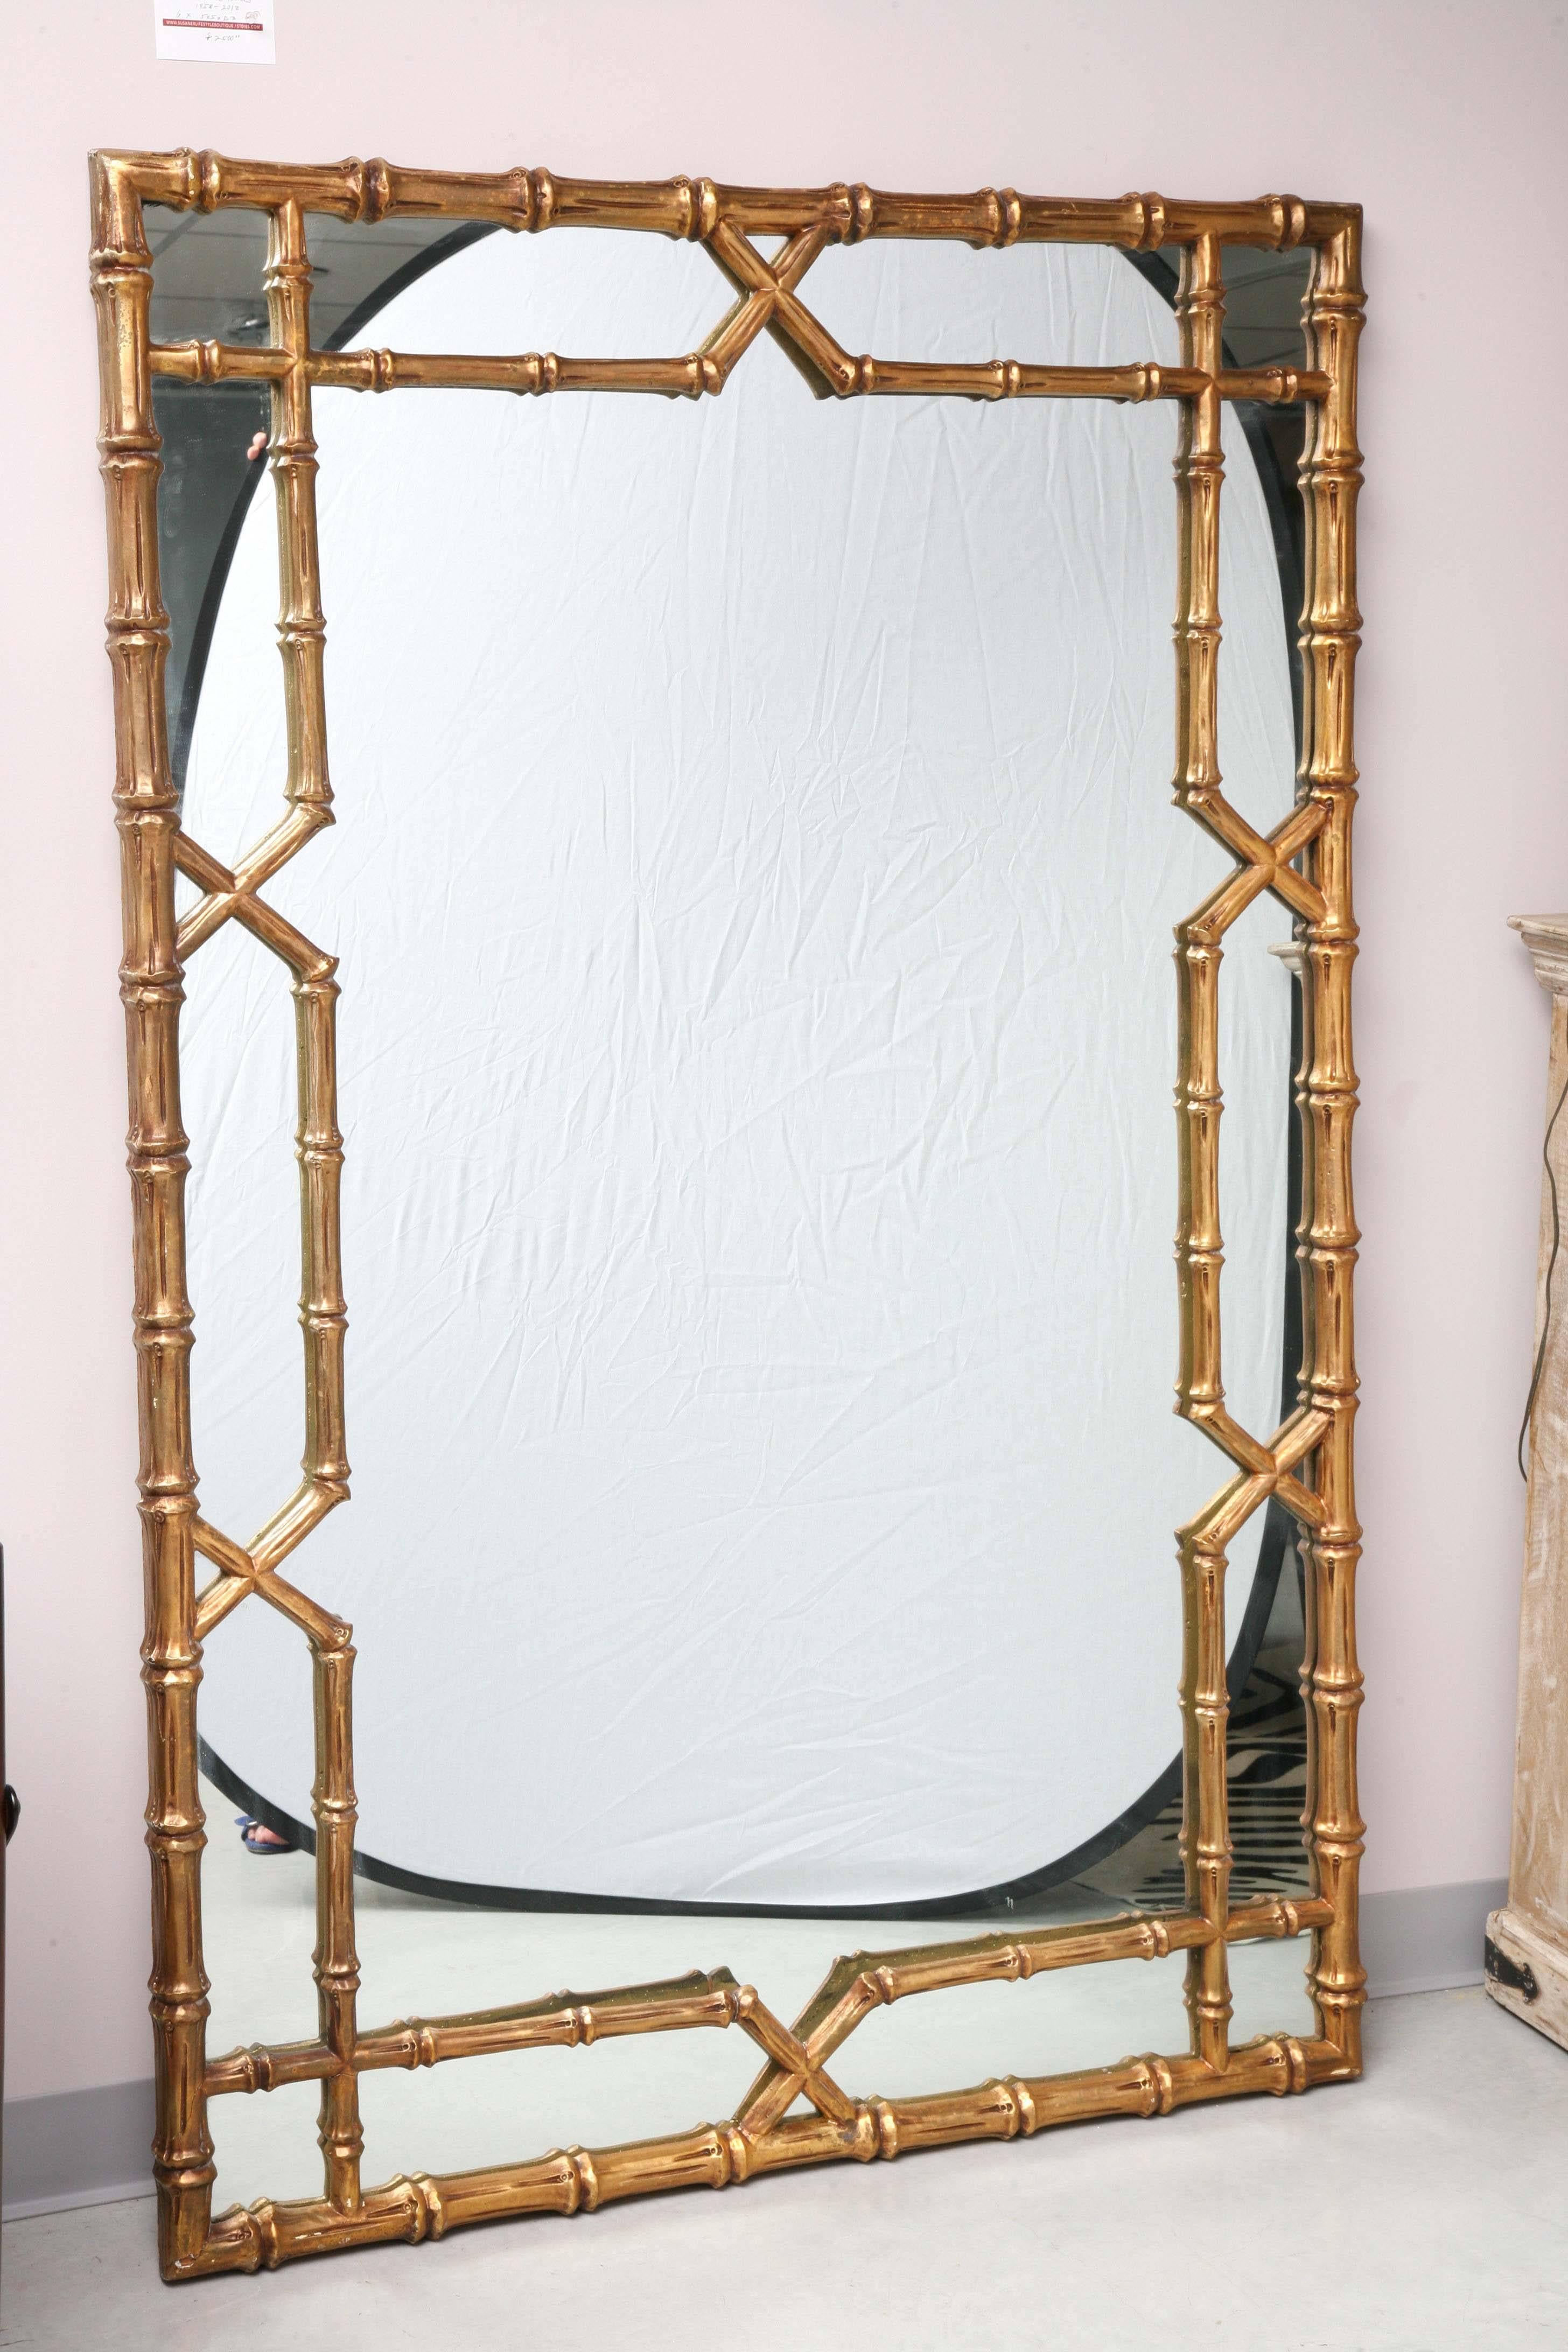 Neoclassical Revival Vintage, Huge Mirror, Faux Bamboo Frame, Gilt, Can Lean Against the Wall